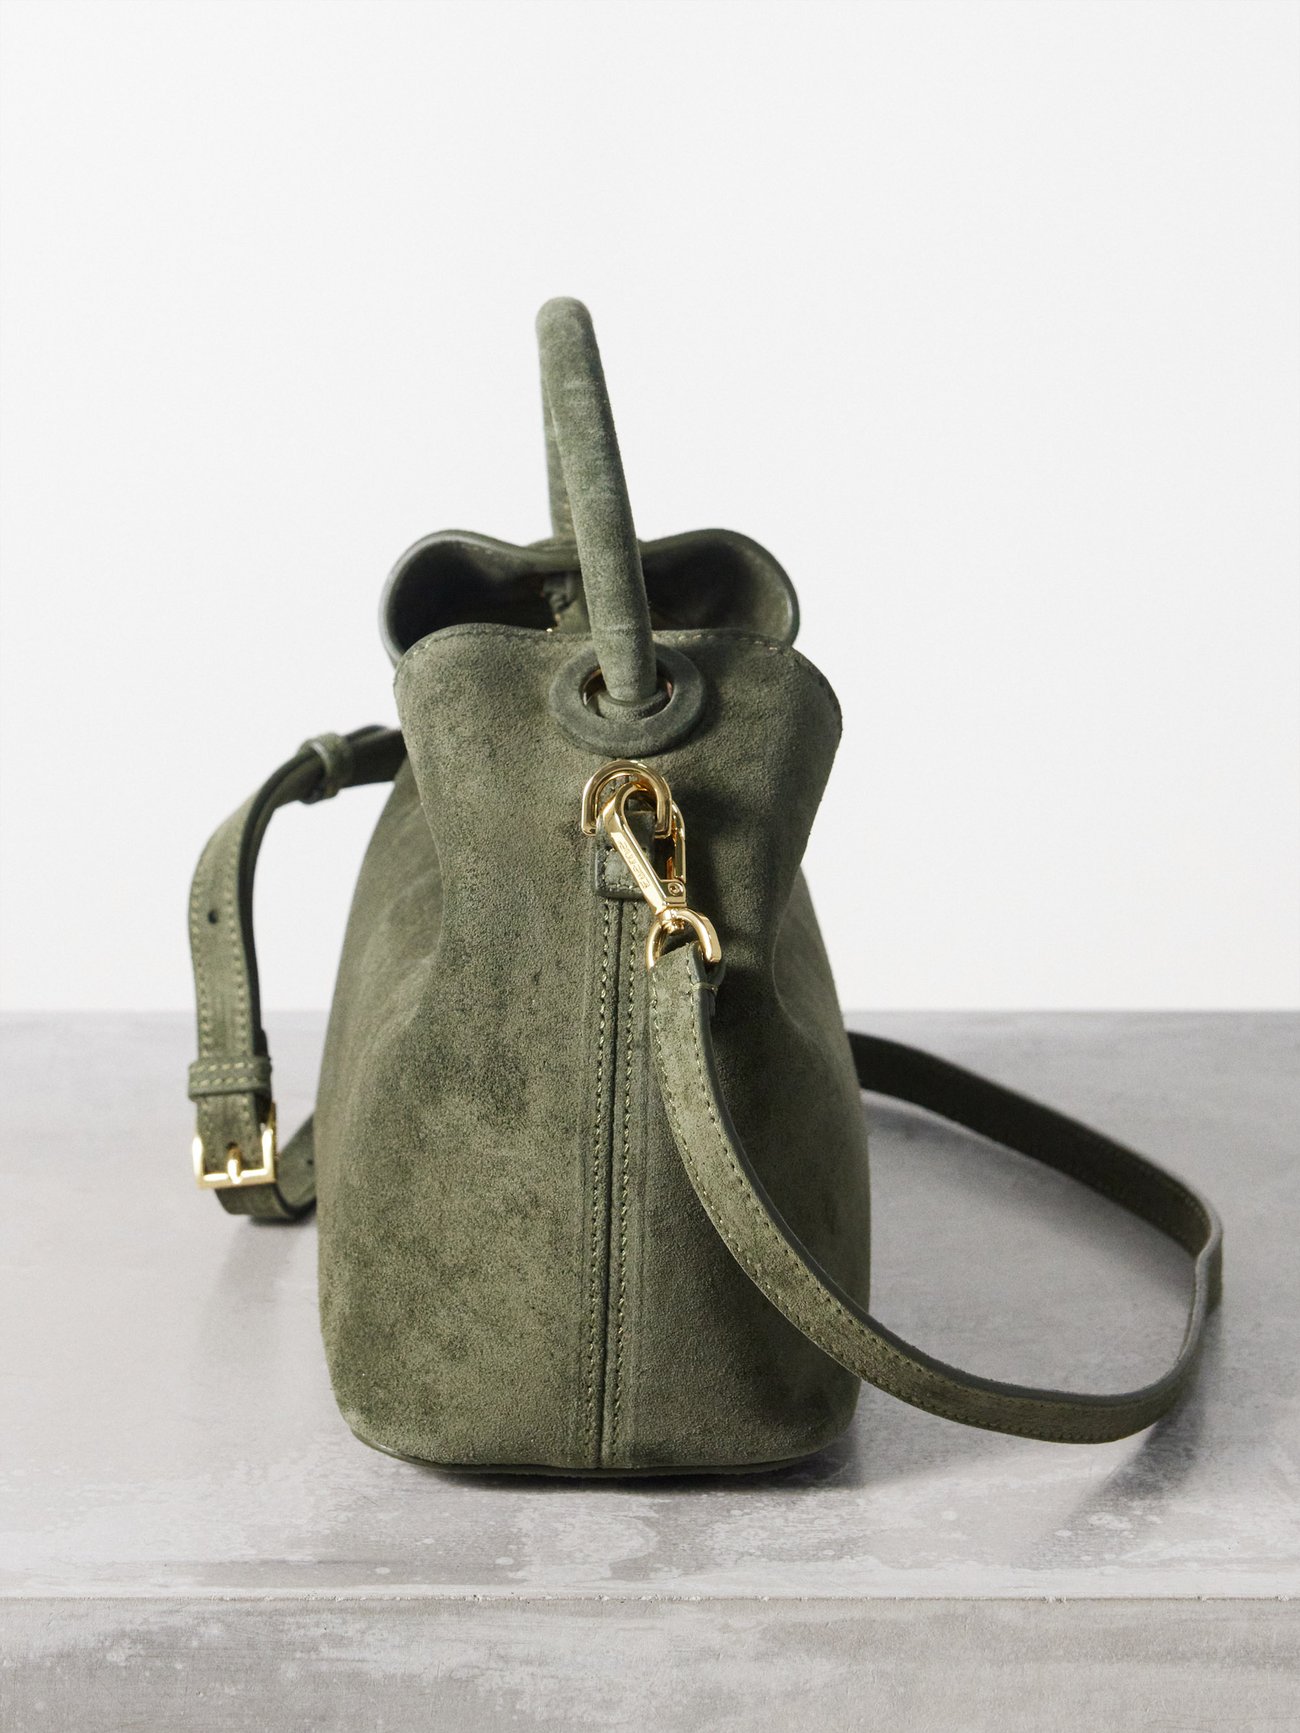 BOHO Suede Leather Bag in GREEN. Crossbody Bag in Genuine Leather,  Messenger Suede Bag. Soft Natural Leather Bag in Green - Etsy